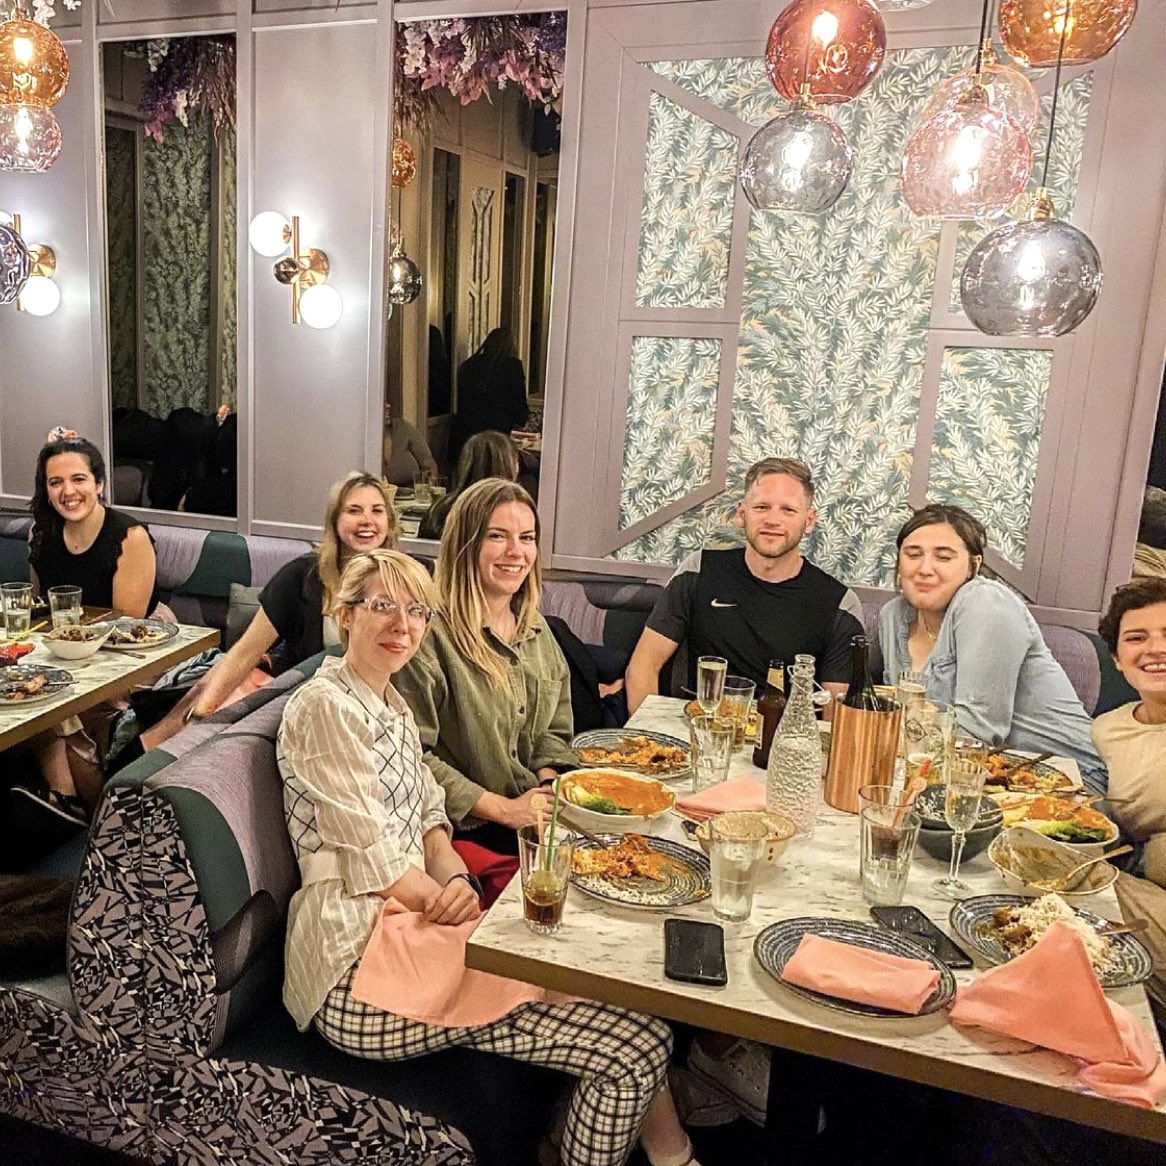 Balham Social have launched a fantastic new lunch set menu, on offer every Tue-Fri, 12pm-2.30pm! The restaurant opened on #Balham High Rd in April & has been proving really popular with locals, with fantastic Google reviews. To see the menu & book, see balhamsocial.com #ad